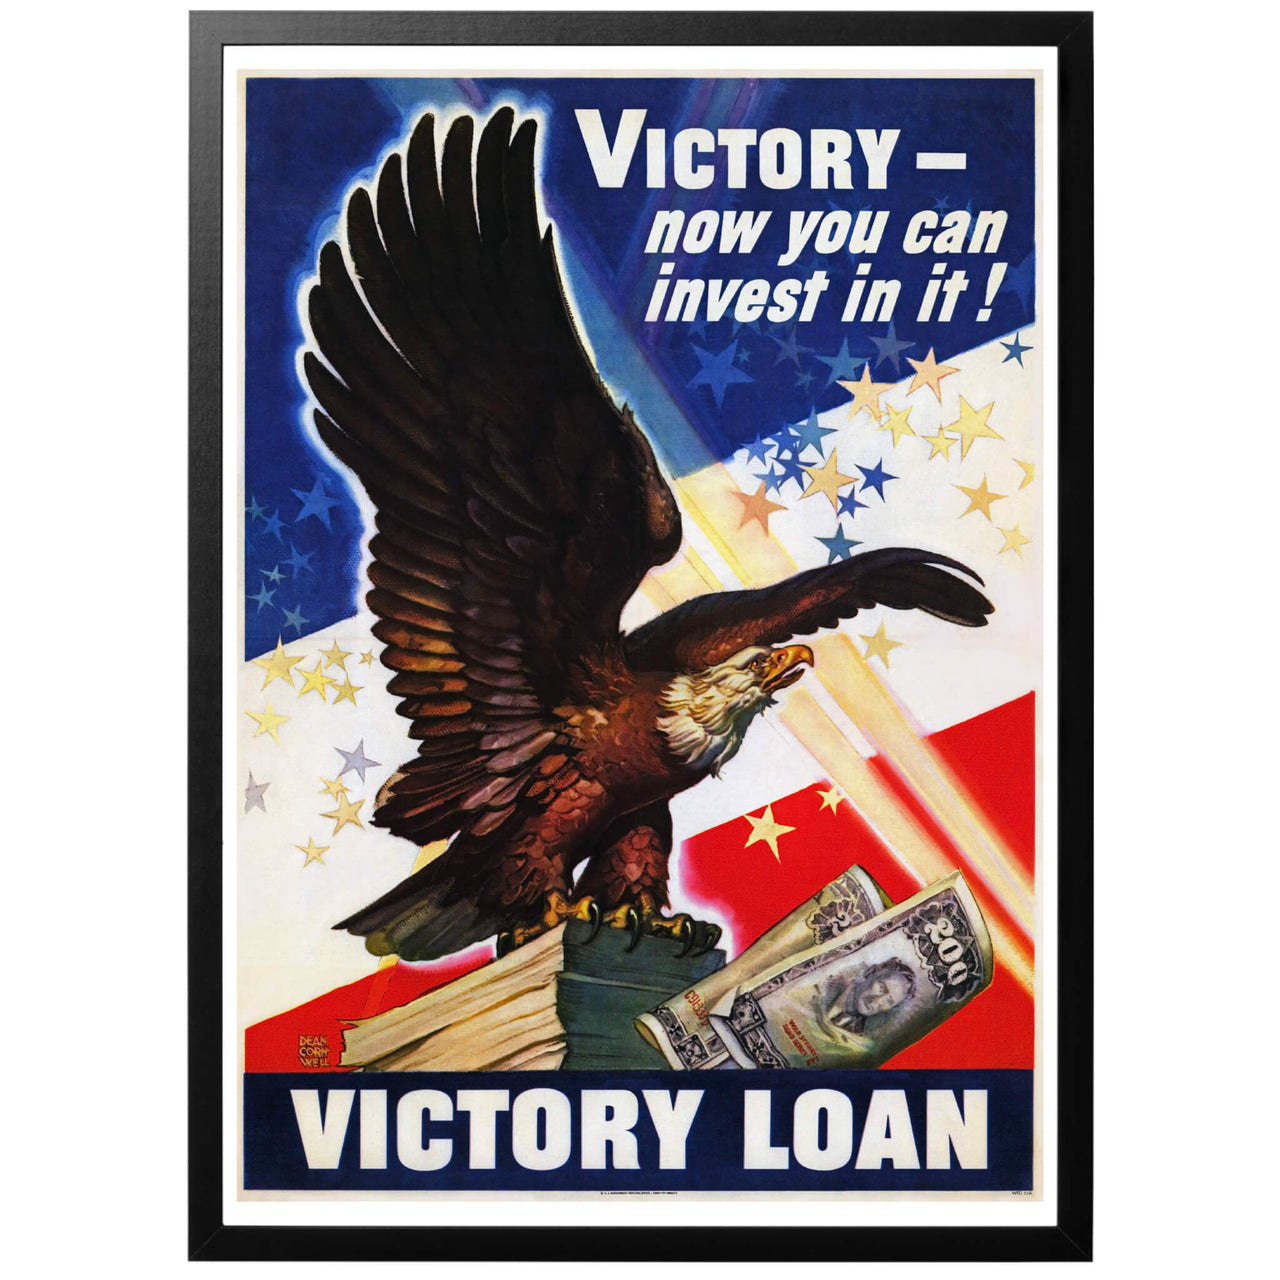 victory-now-you-can-invest-in-it-poster